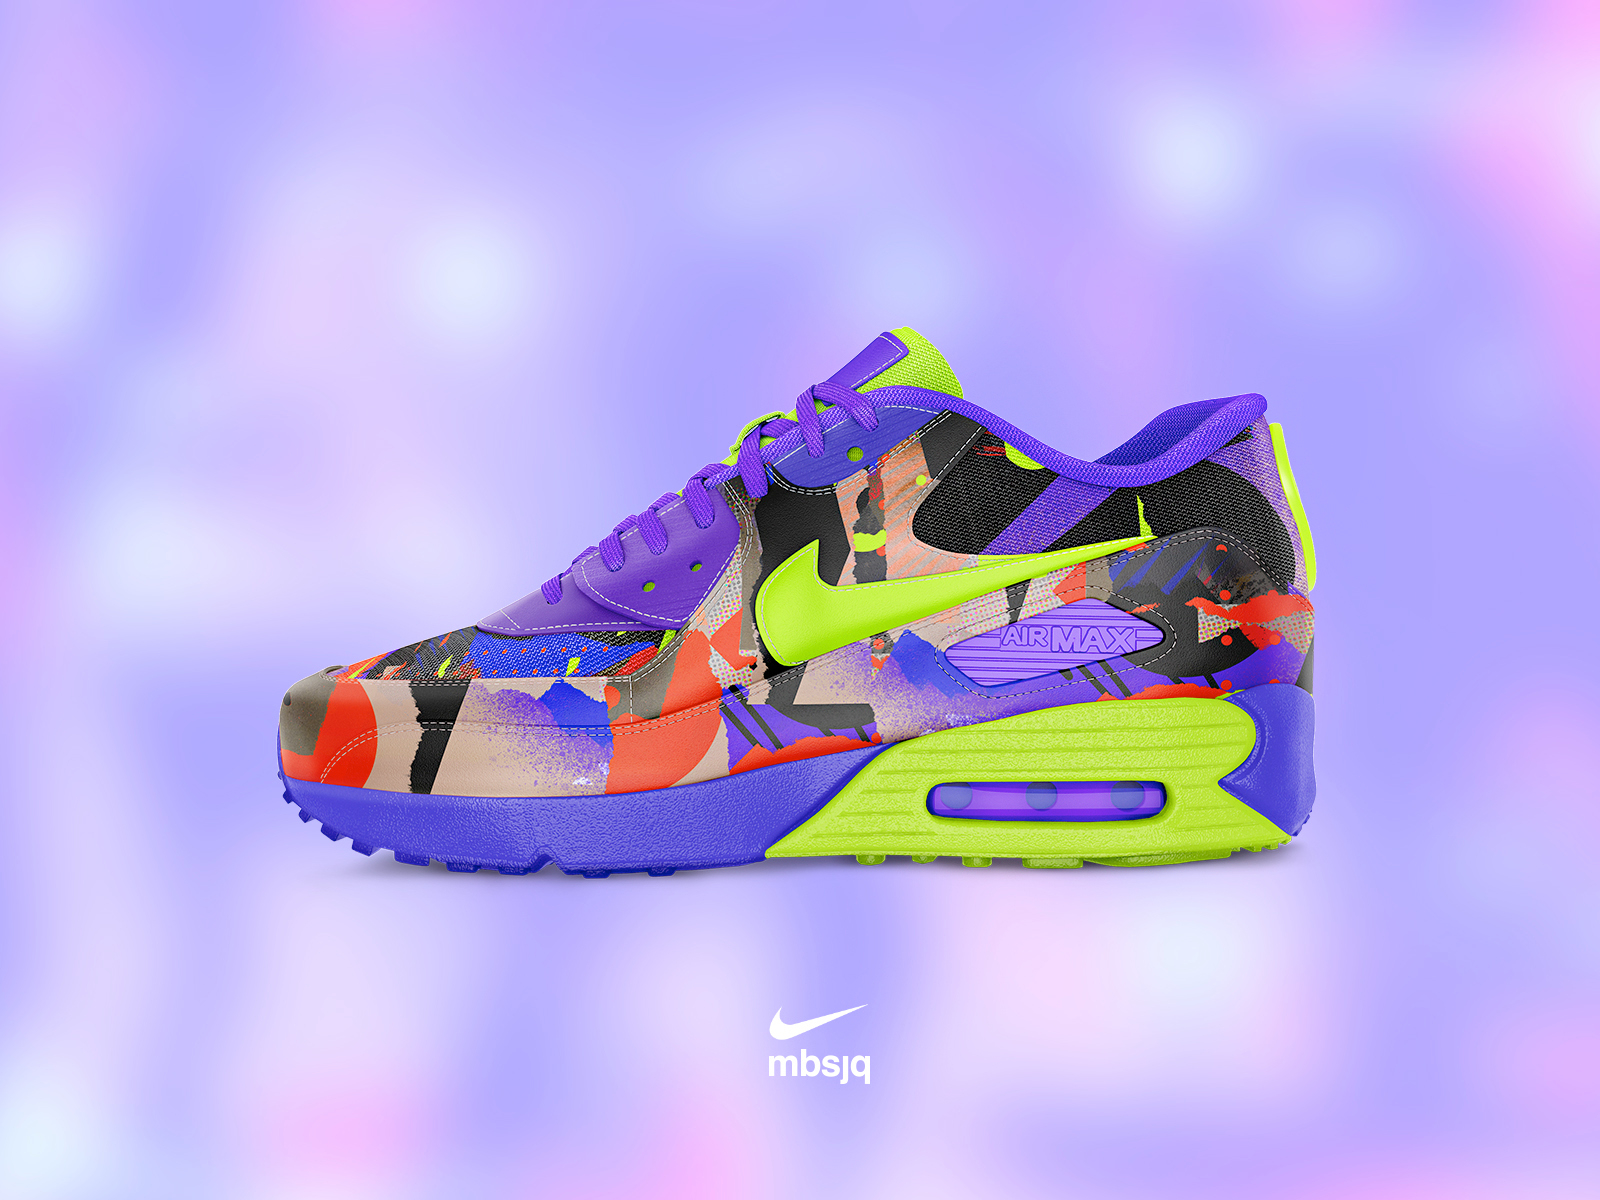 Nike vs mbsjq 2020 art collage color concept mockup nike nike air nike air max photoshop trainers vibrant